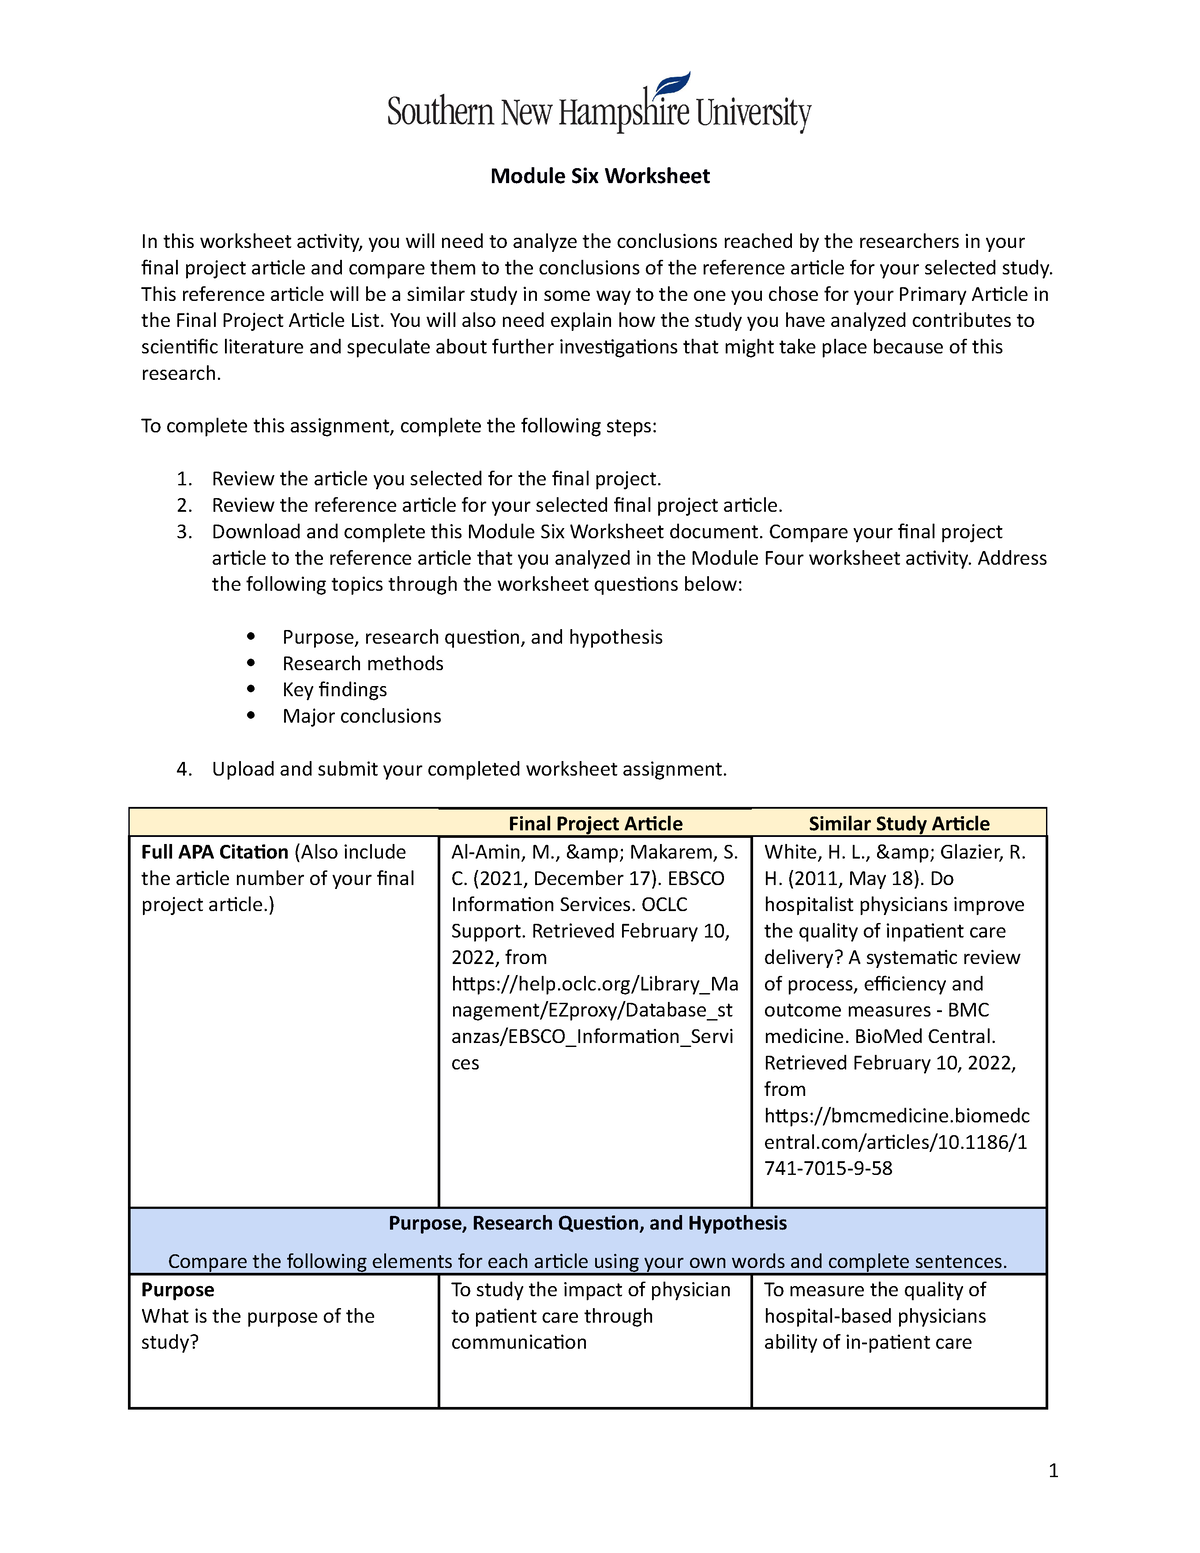 ihp-340-6-2-worksheet-communication-of-a-physician-module-six-worksheet-in-this-worksheet